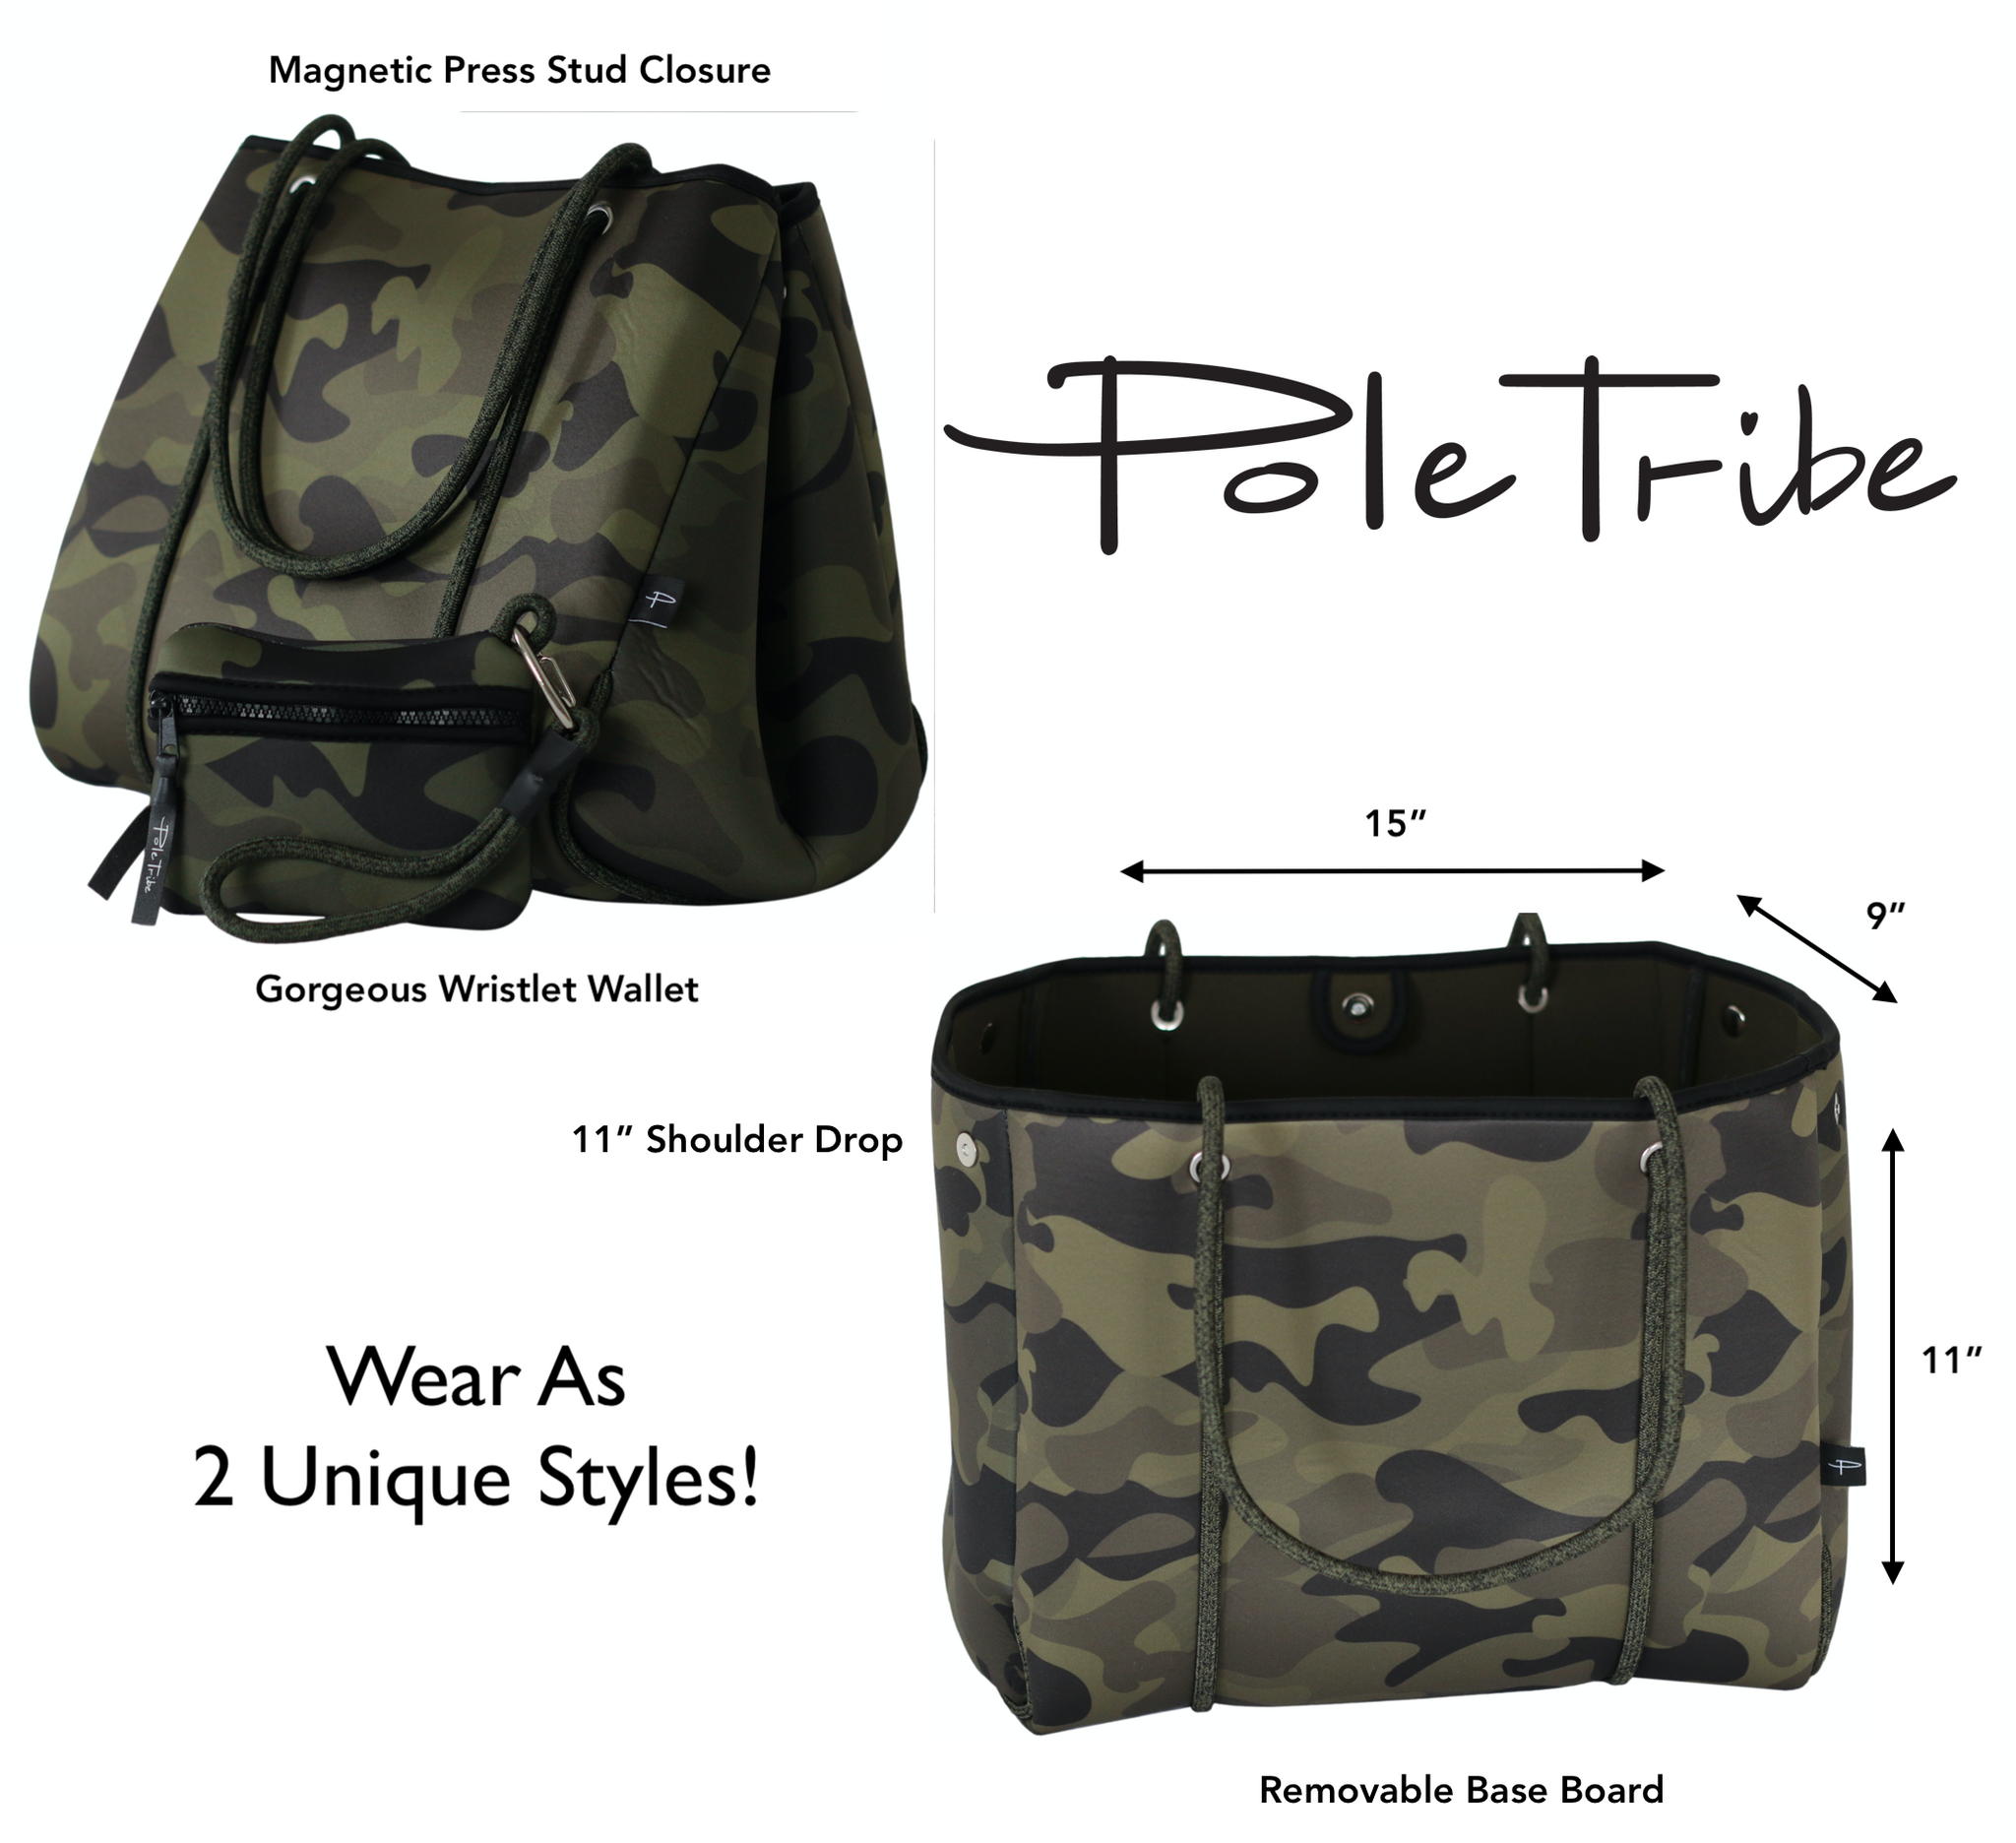 Cienna Quilted Camo Tote - the olde farmstead